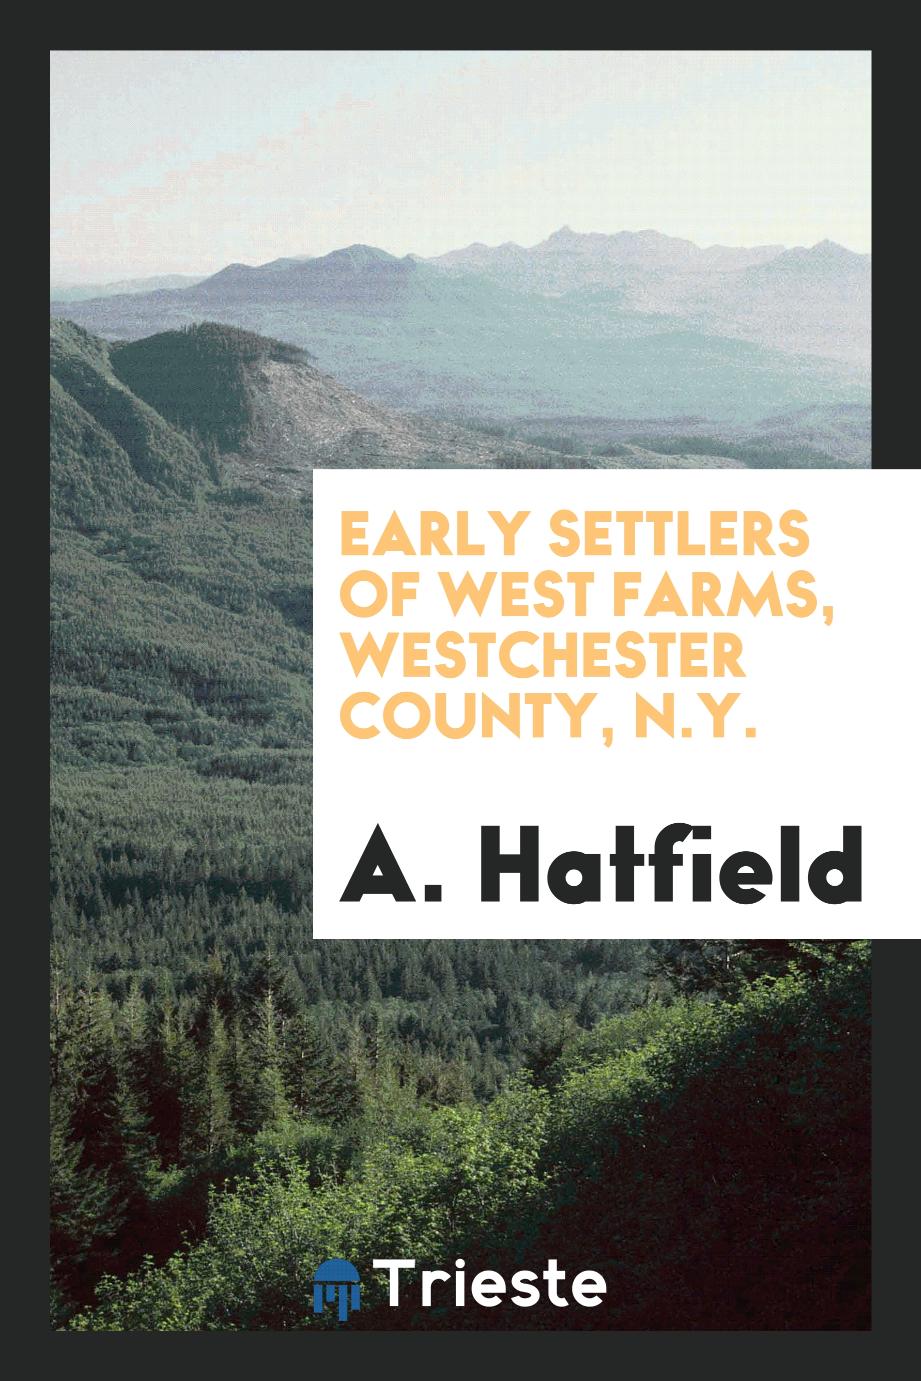 Early settlers of West Farms, Westchester County, N.Y.